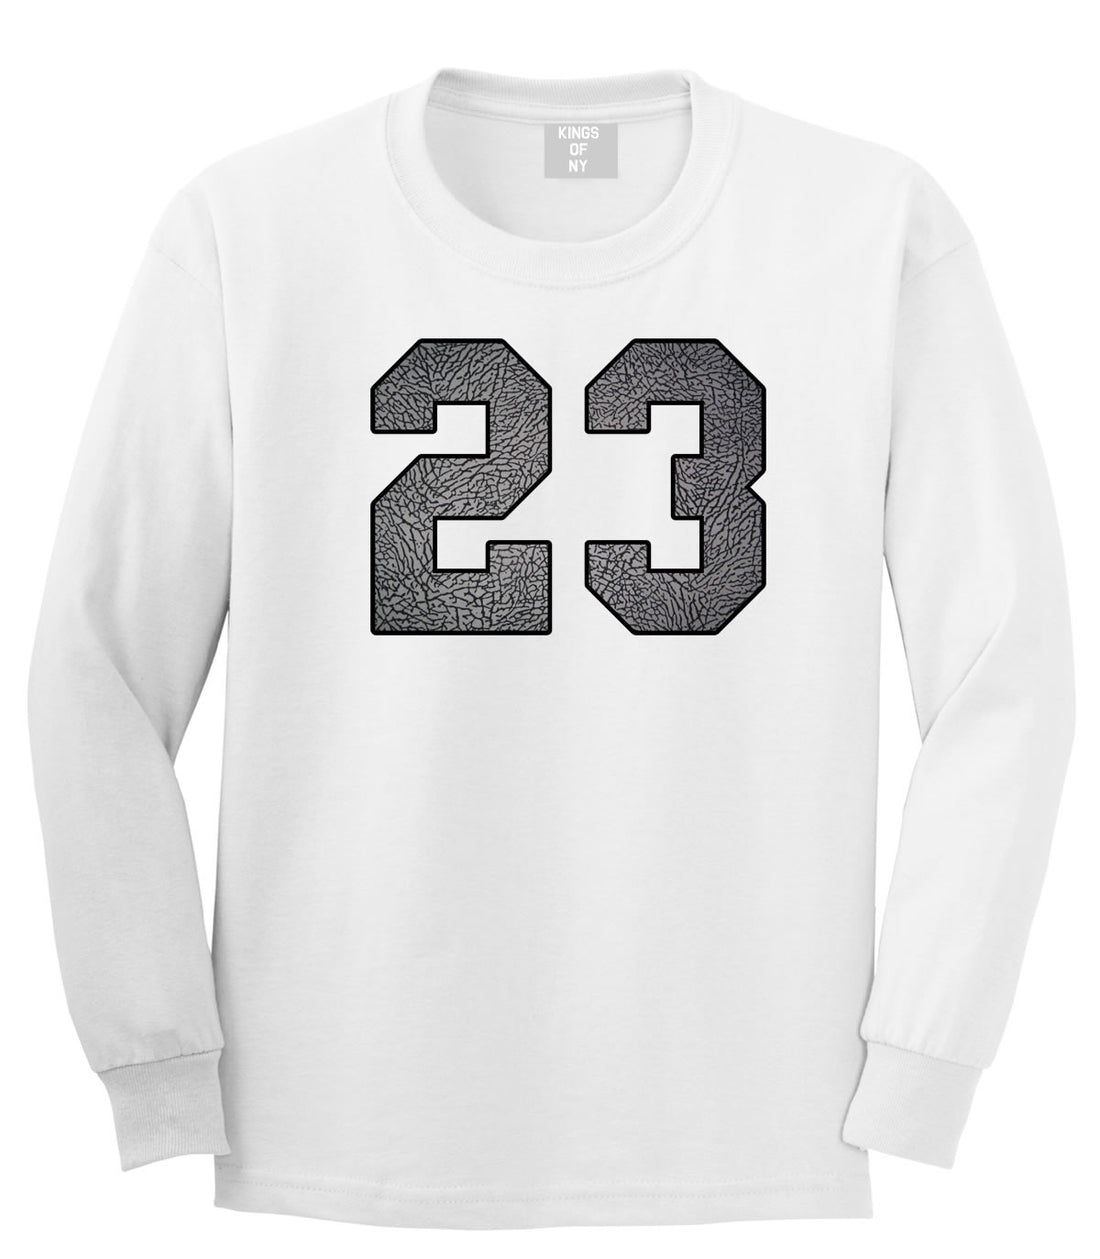 23 Cement Jersey Long Sleeve T-Shirt in White By Kings Of NY